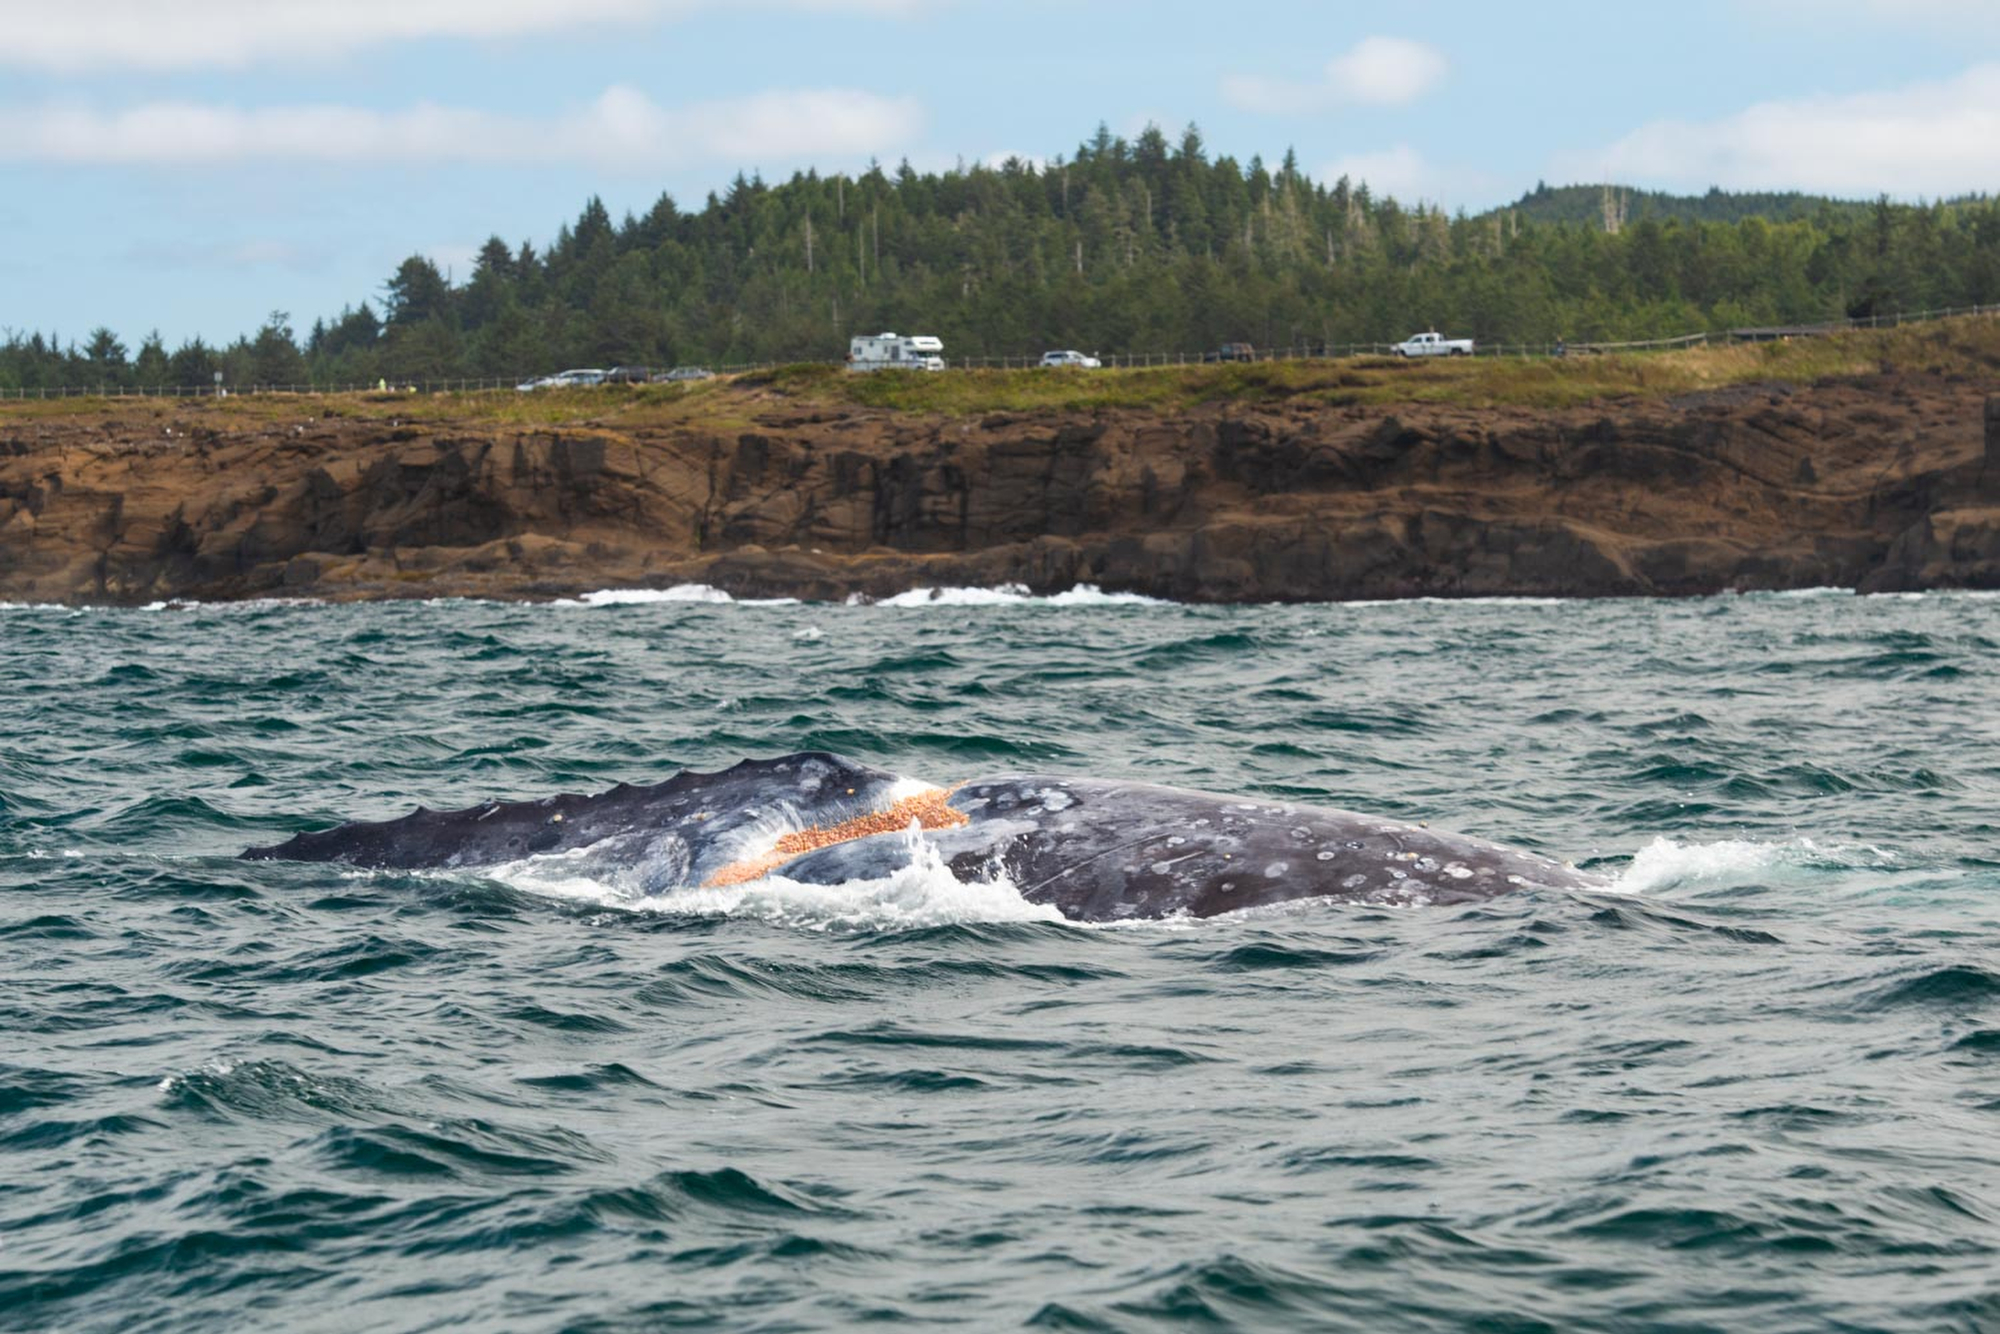 Get to know 10 of Oregons most famous gray whales (photos and graphics) photo